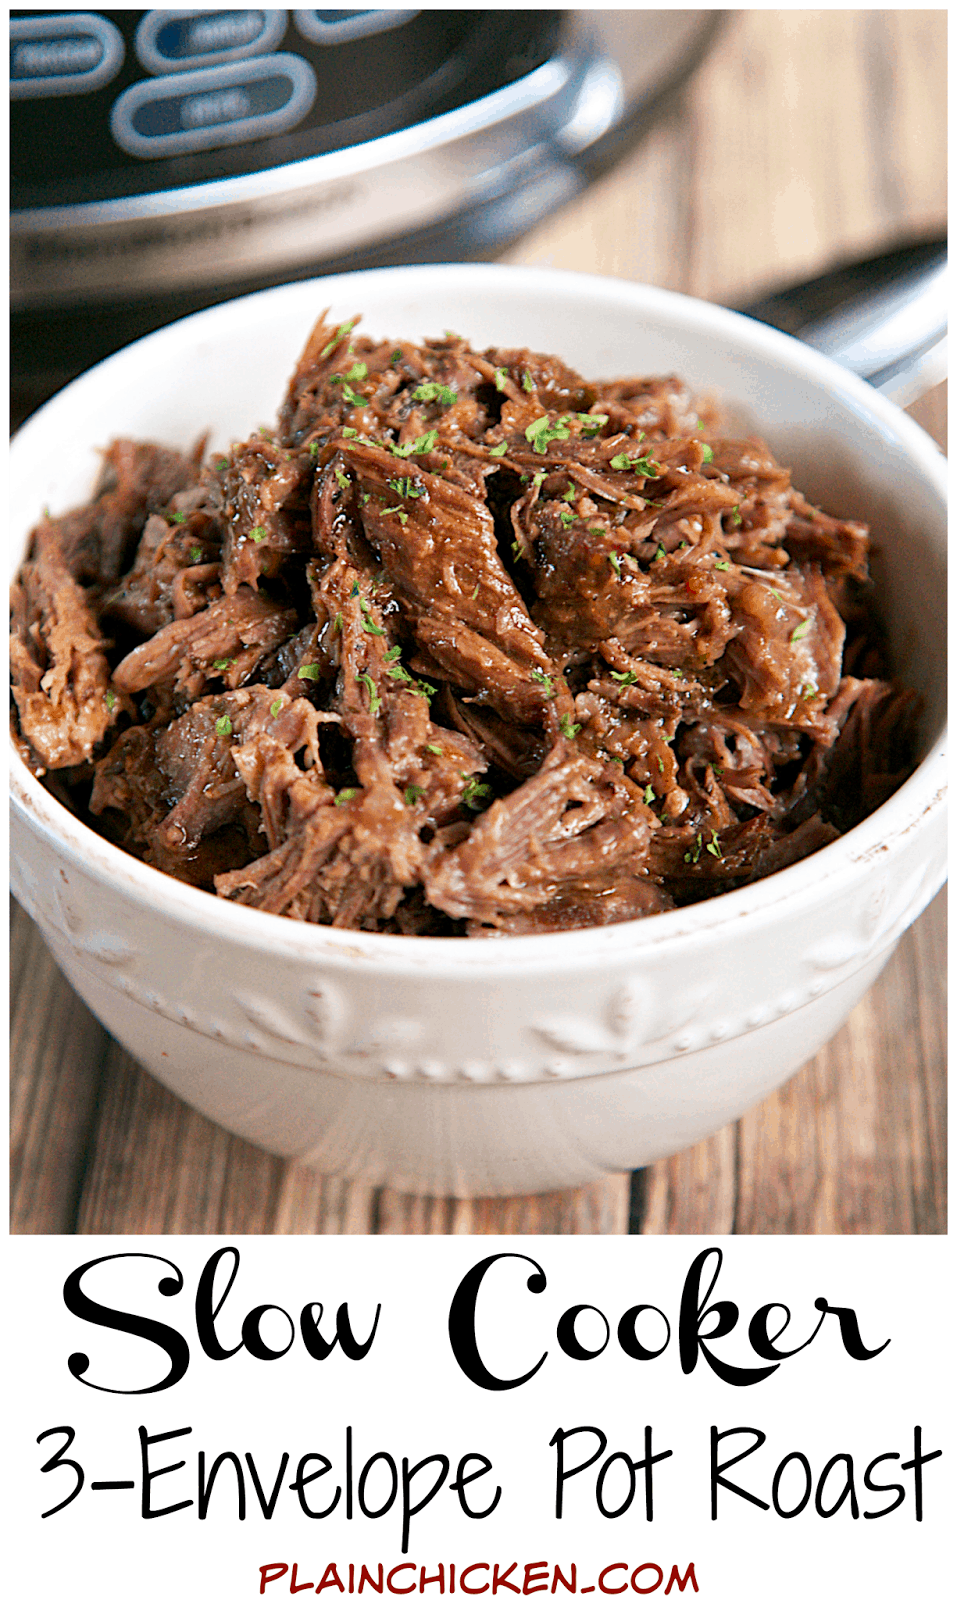 Slow Cooker 3-Envelope Pot Roast Recipe - pot roast slow cooked all day. So tender and delicious. Only takes seconds to prepare and dinner is ready when you get home from work! We served it with some yummy cheese grits. Rice or mashed potatoes would be good. Make sure to ladle the yummy sauce over it!